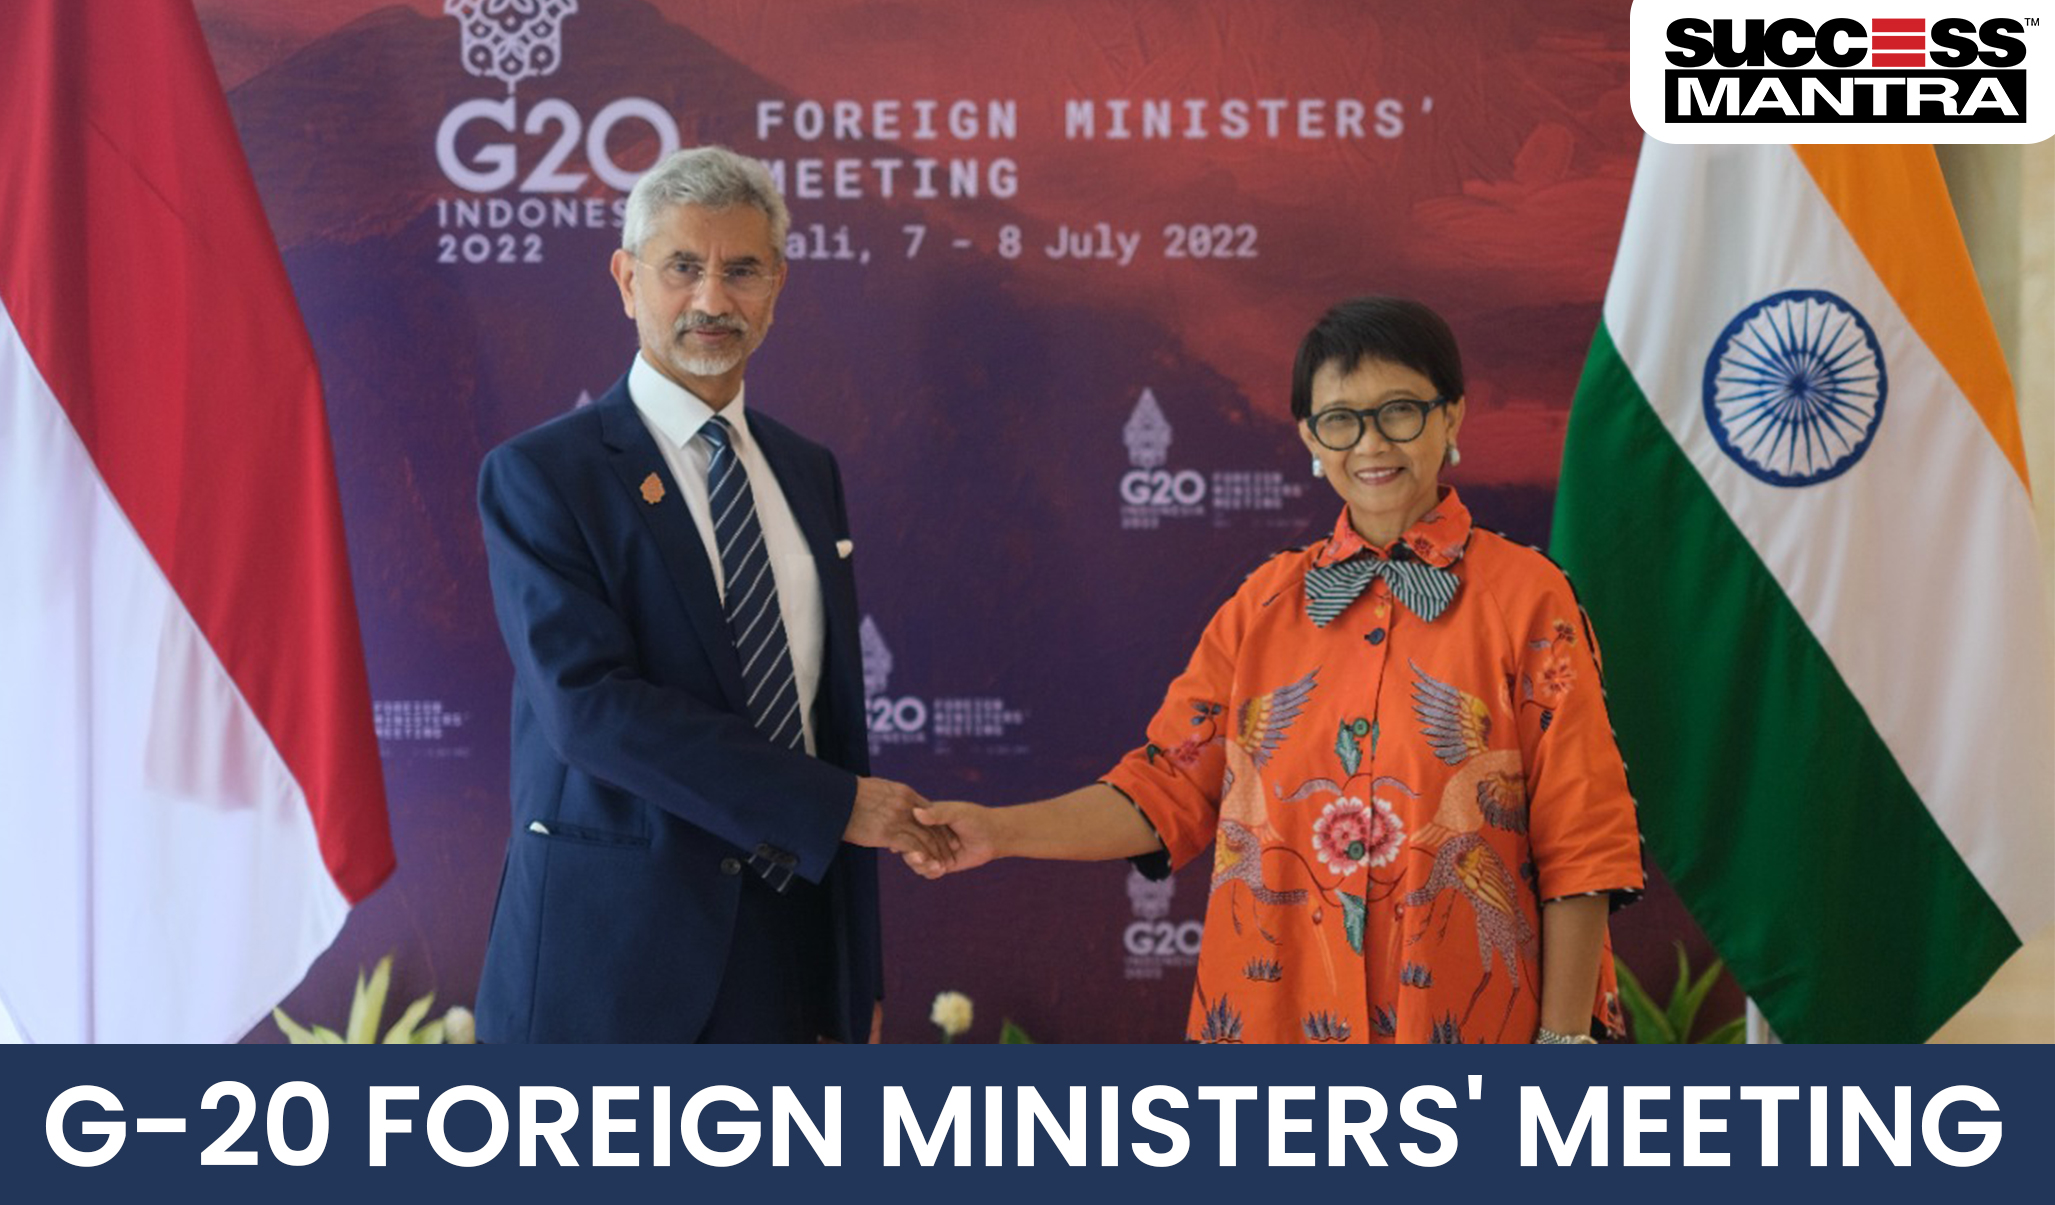 G 20 FOREIGN MINISTERS MEETING